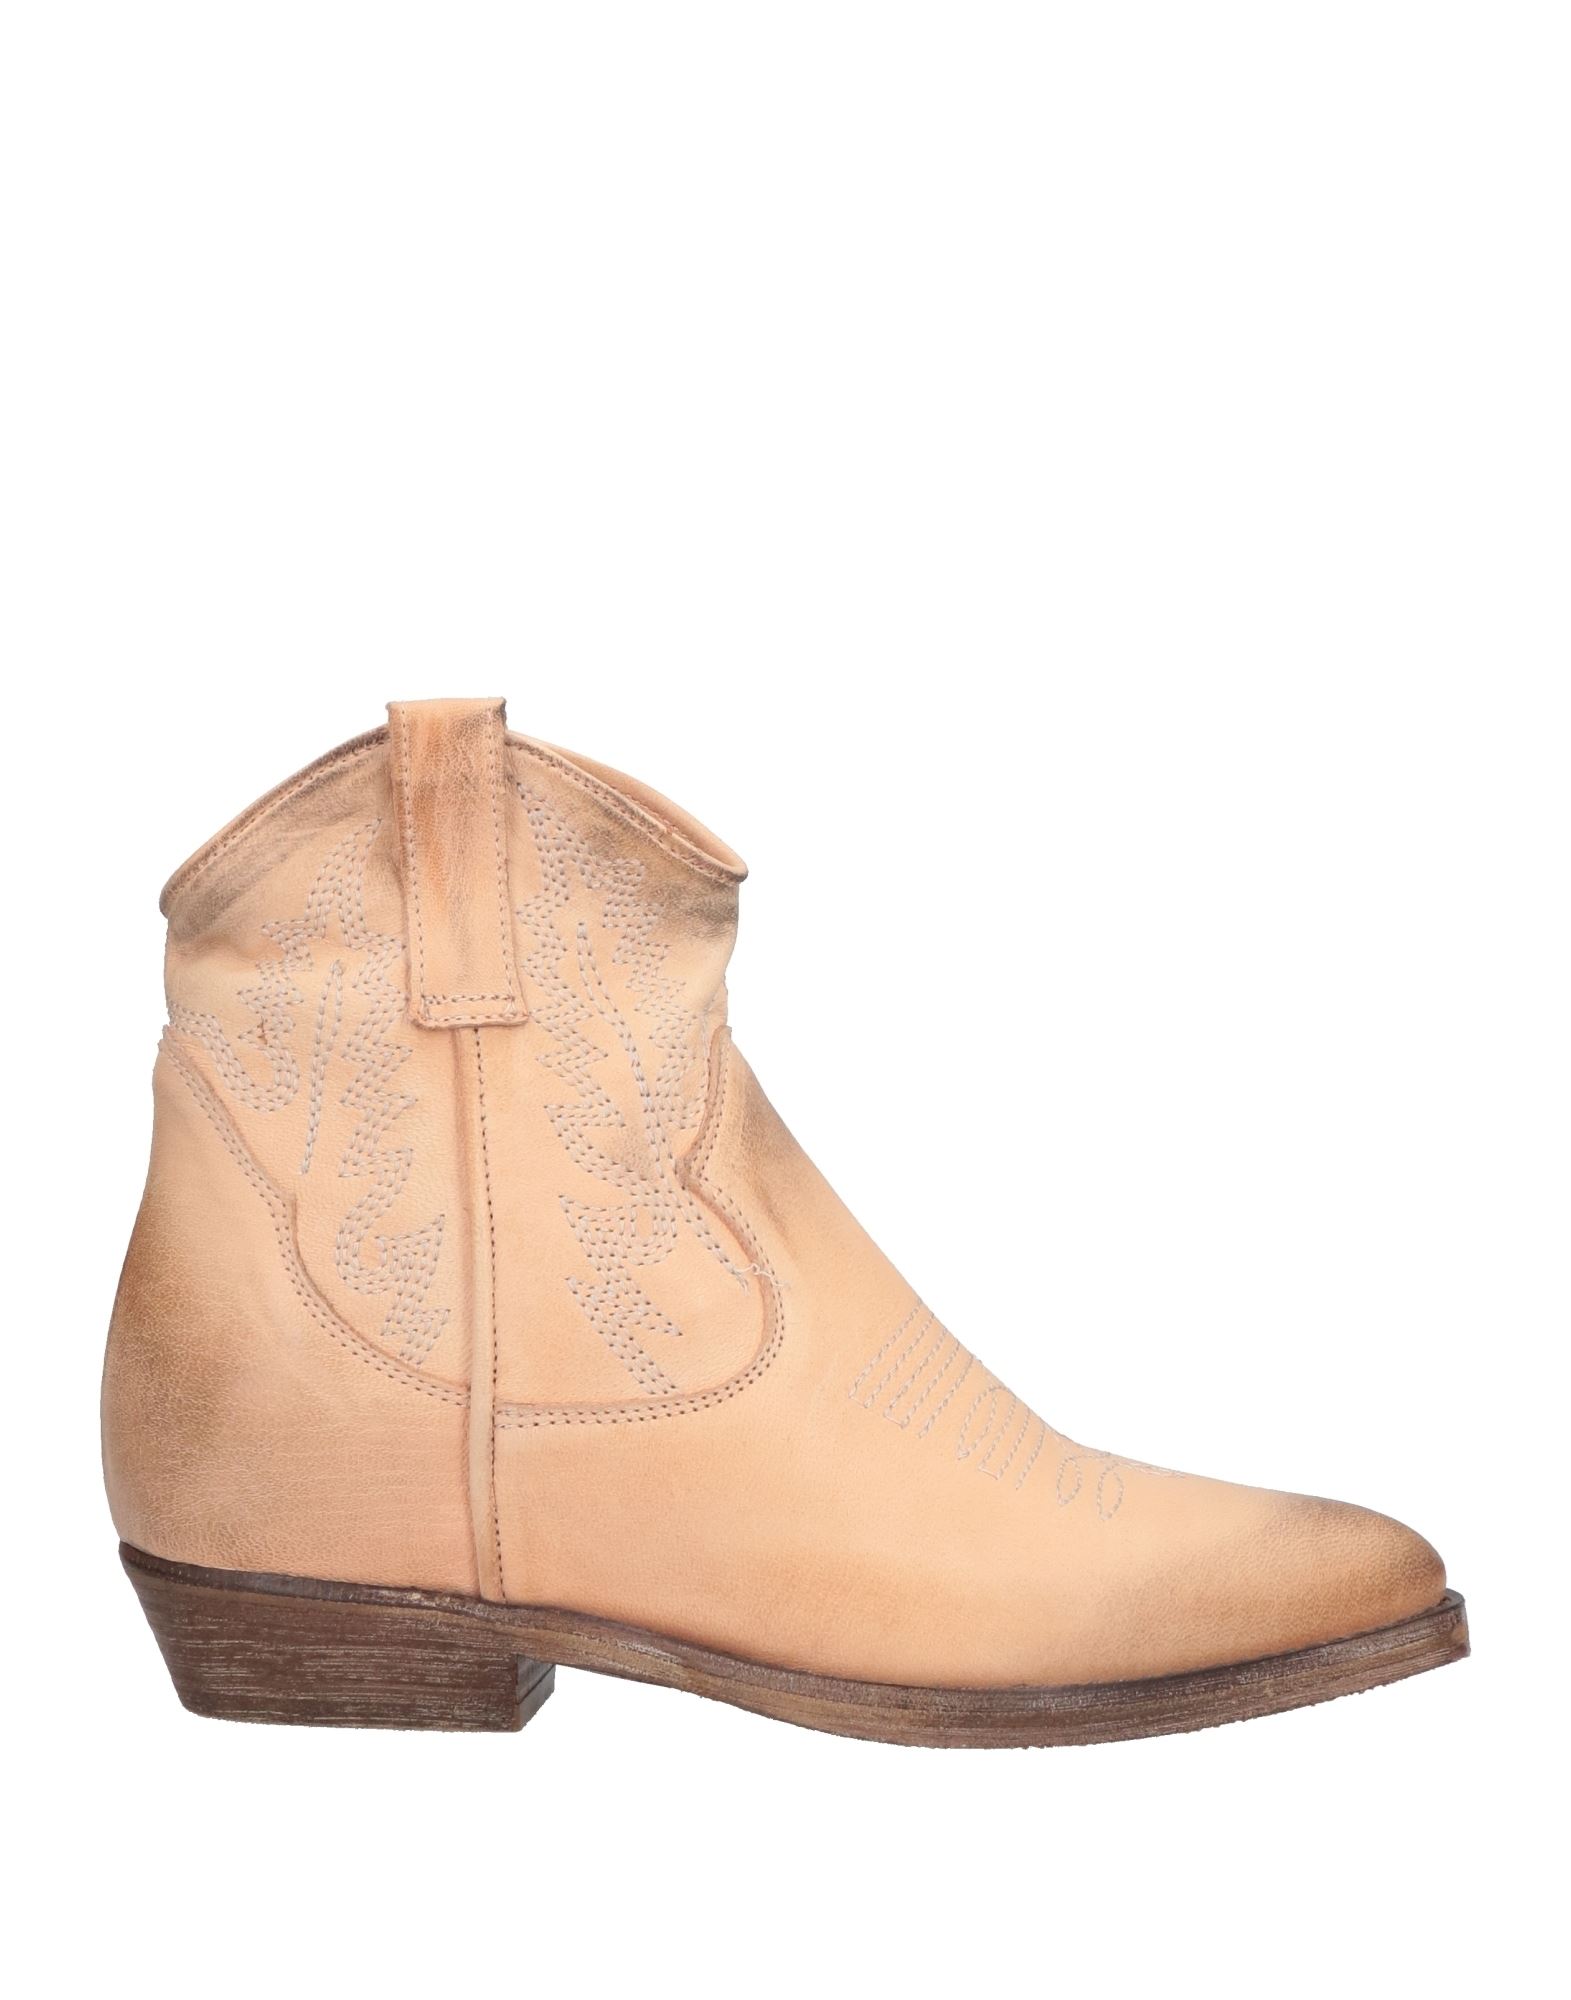 Metisse Ankle Boots In Blush